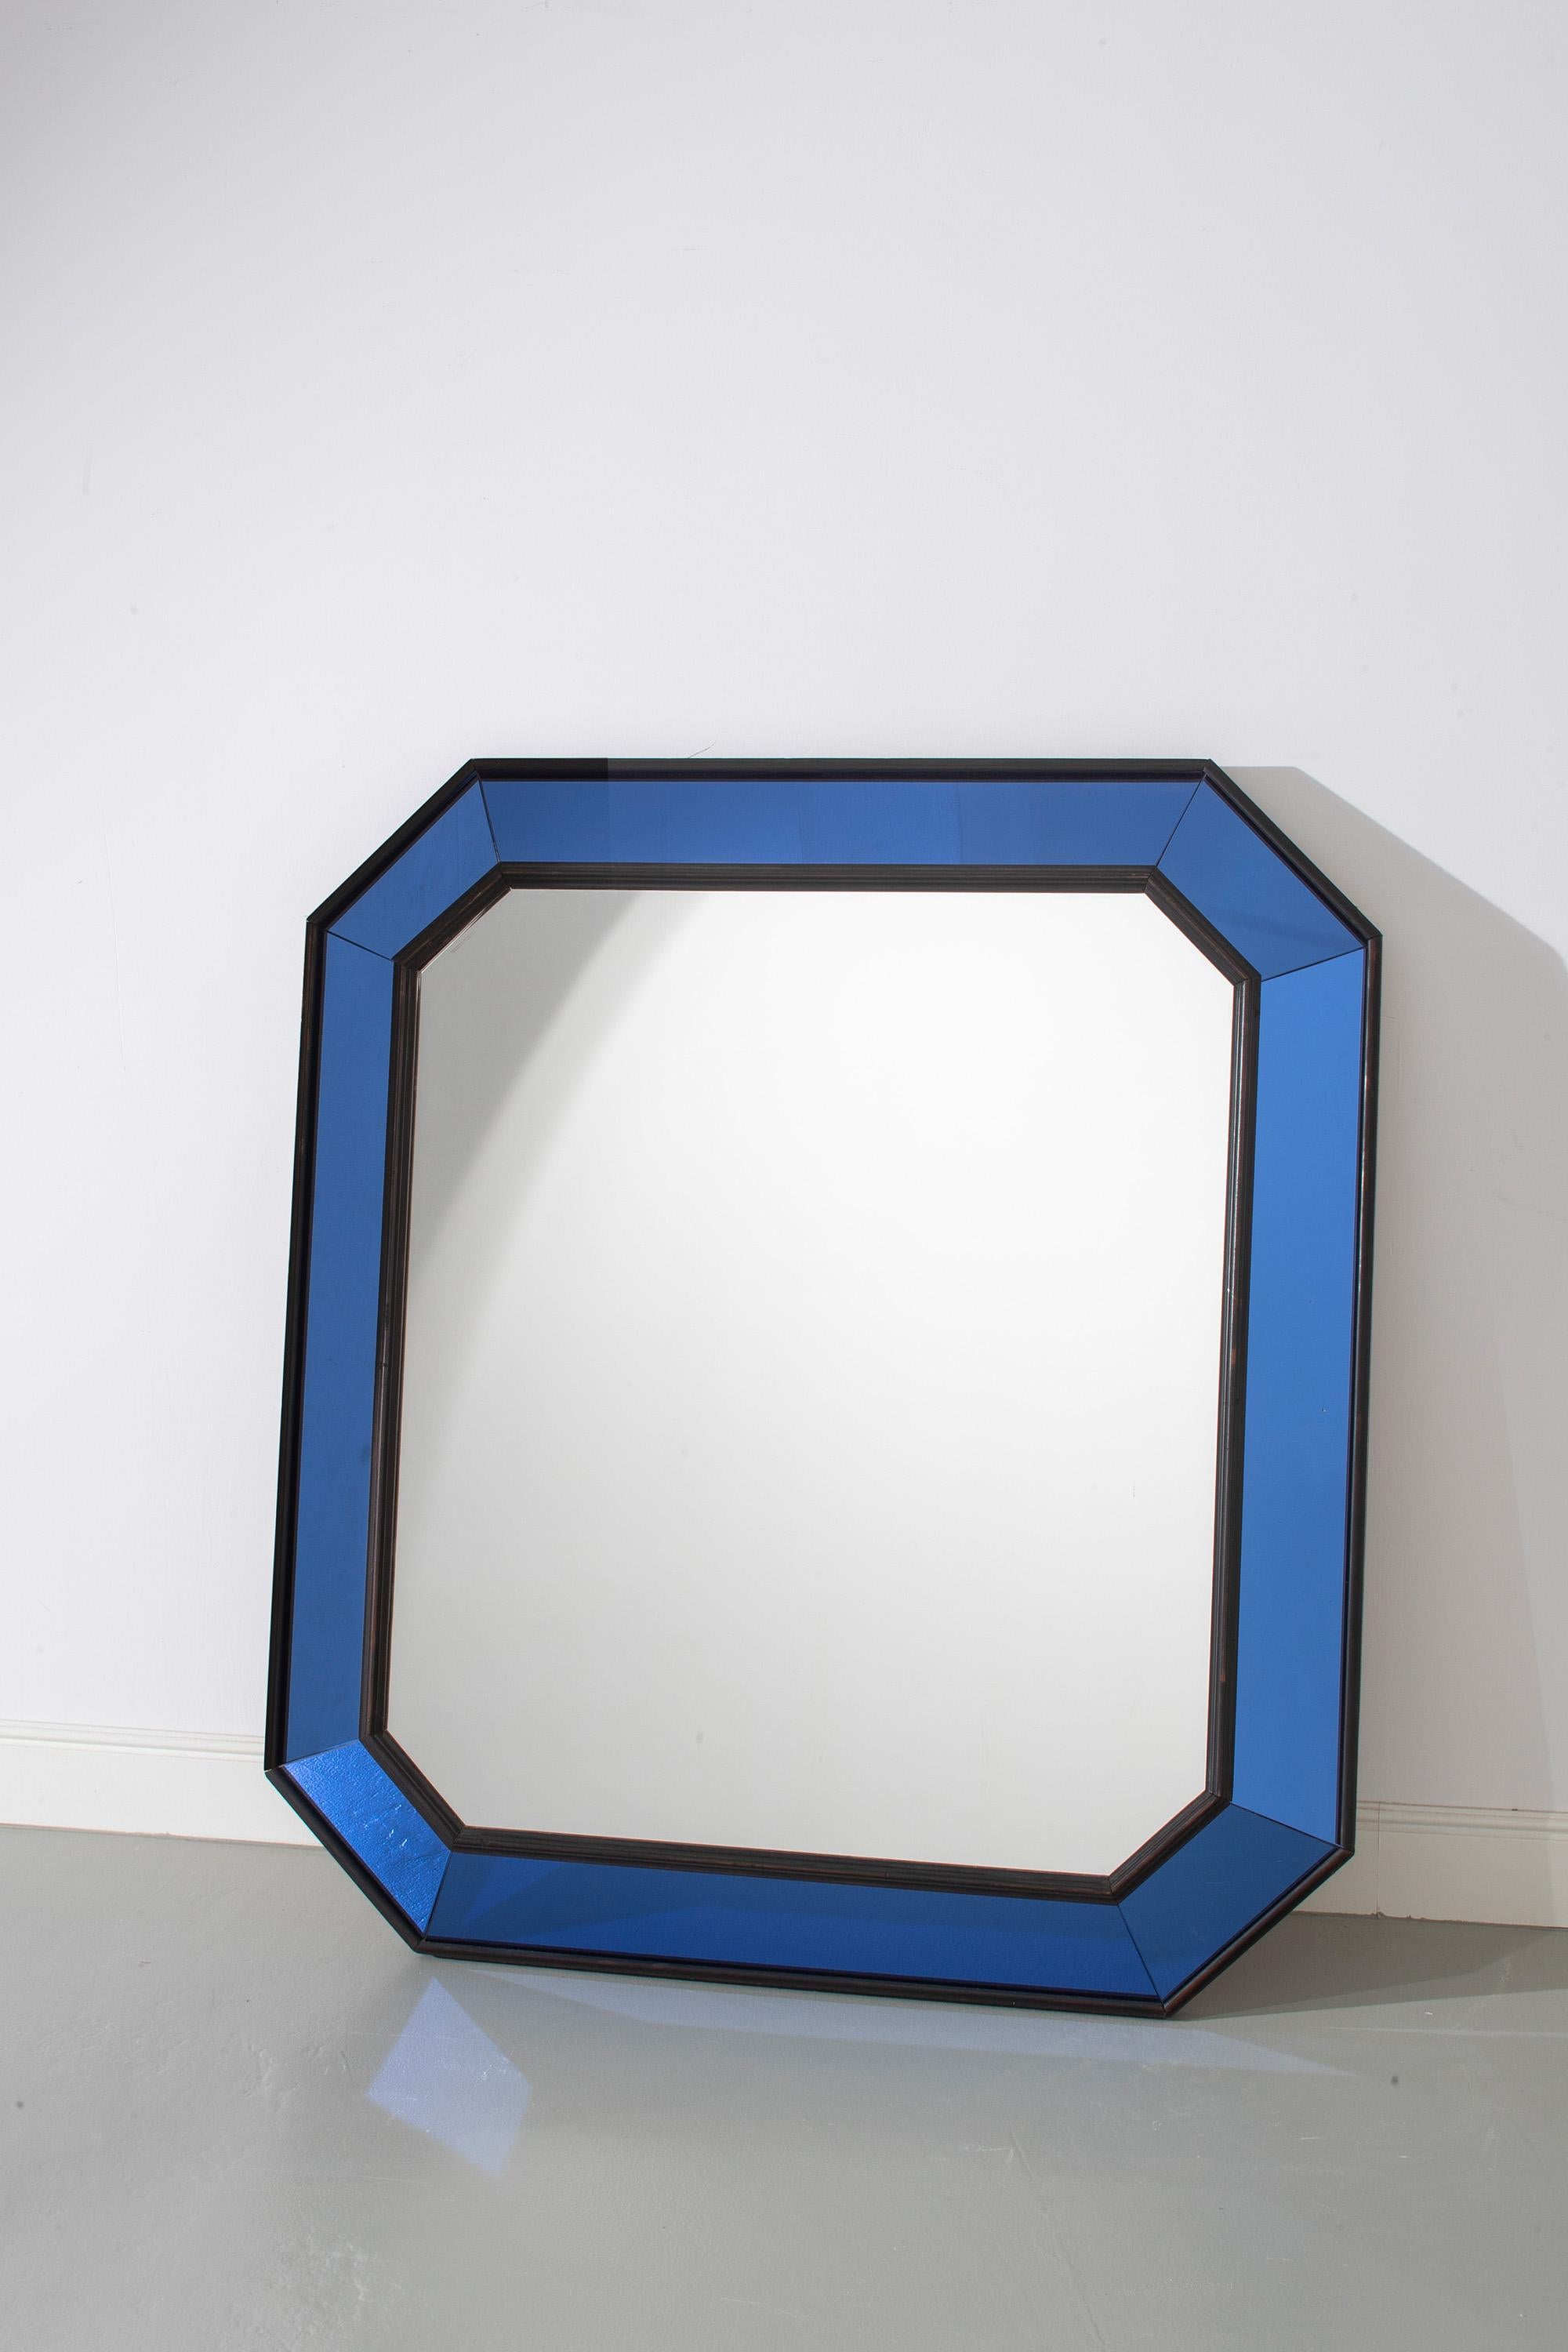 Mid century Italian blue glass cushion mirror

An impressively scaled mid-century Italian cushion mirror with a blue glass and ebonised wooden frame.

Dimensions: H 123.5cm x W 112cm x D 8cm
In perfect condition.
Available in other size